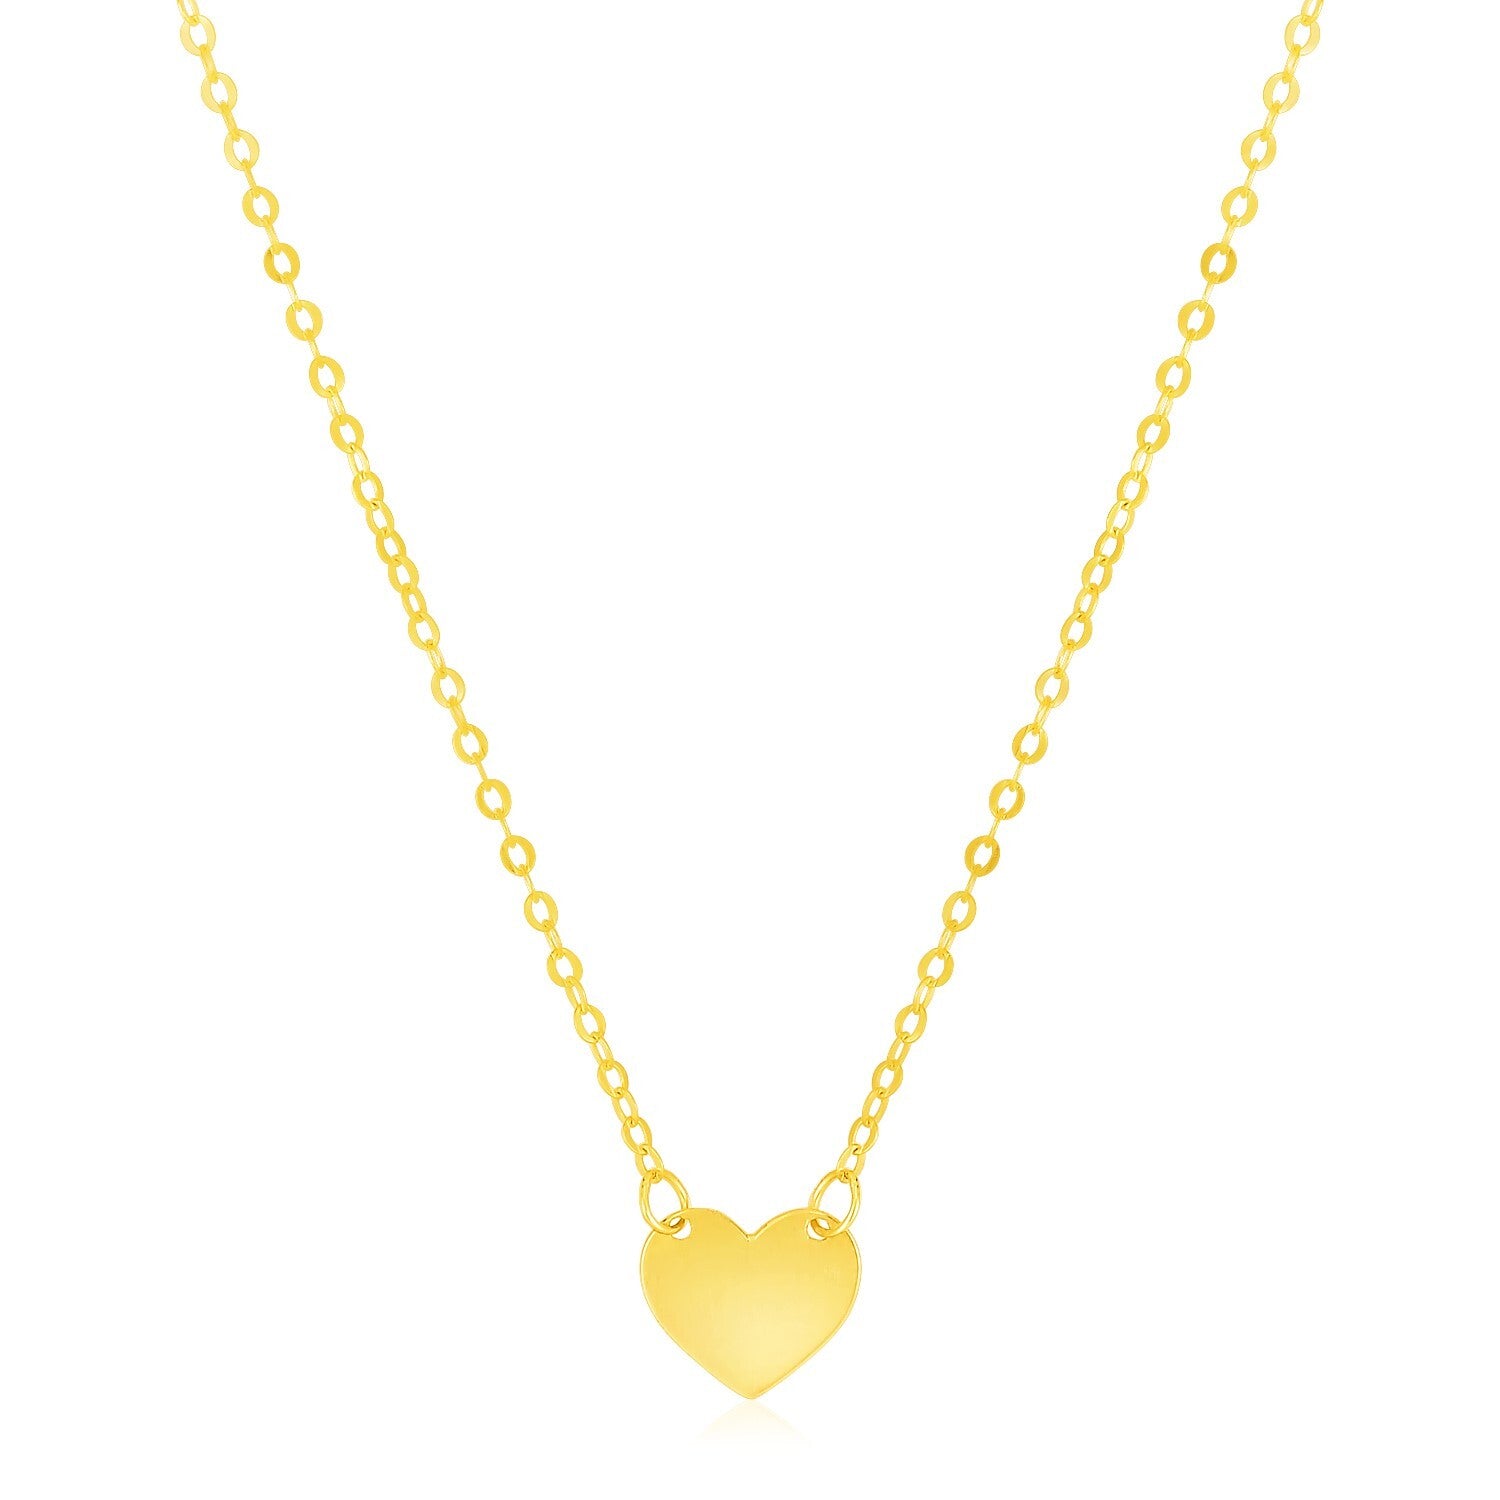 14k Yellow Gold Polished Mini Heart Necklace, size 18''